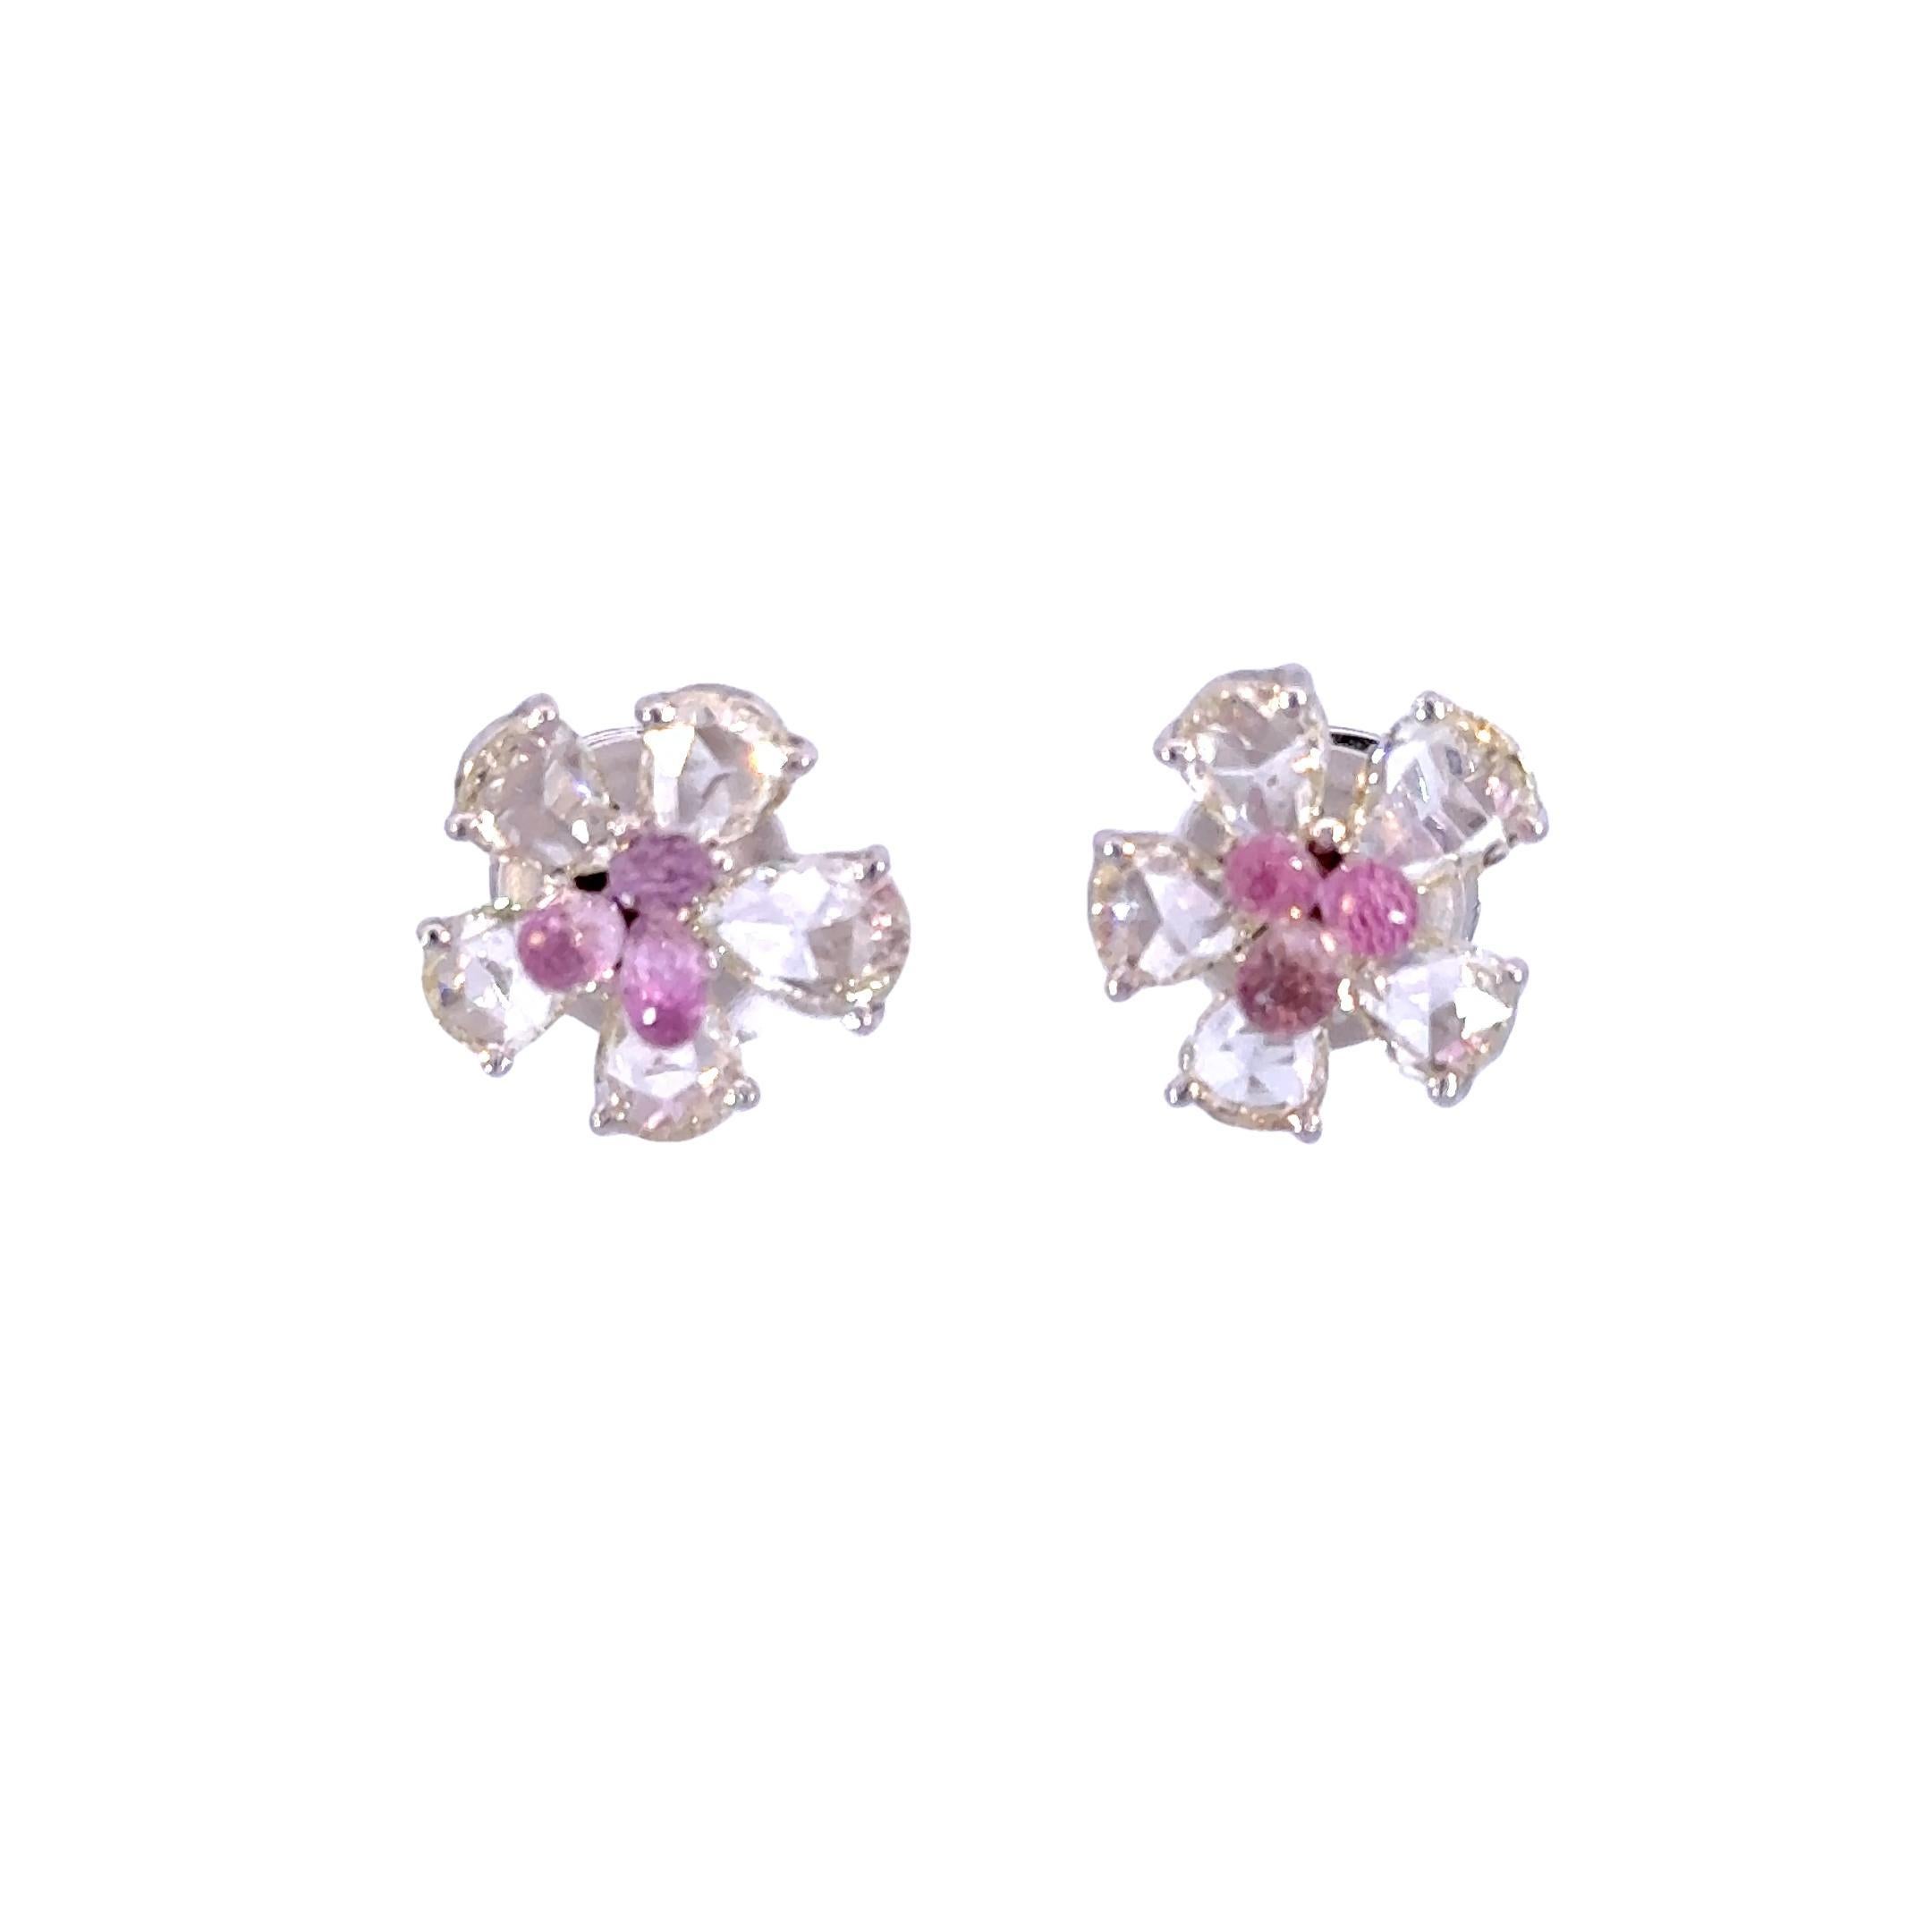 Introducing our Tourmaline Rosecut Studs—a delicate and enchanting pair that marries the timeless brilliance of diamonds with the captivating allure of pink tourmalines. These exquisite studs feature 2.38 carats of diamonds and 2 carats of pink